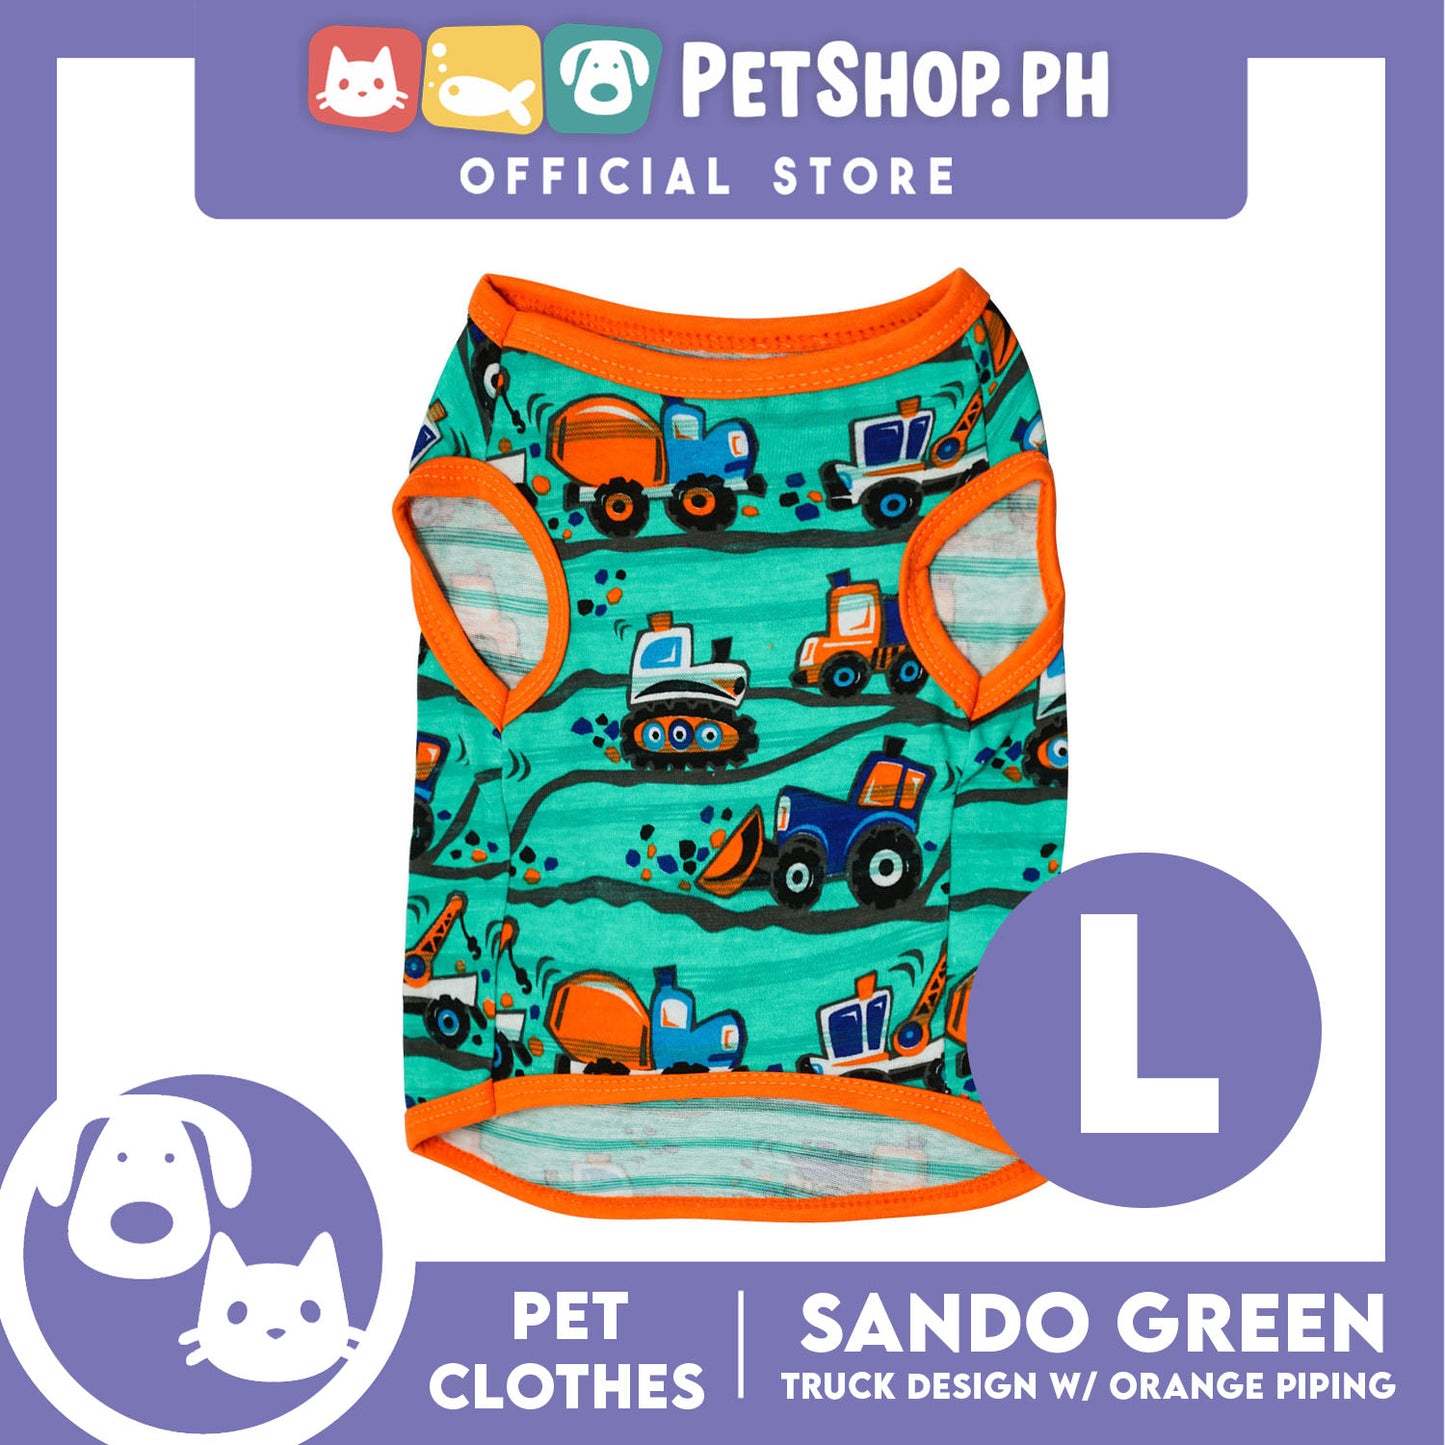 Green Pet Sando with Truck Design with Orange Piping Sleeveless (Large) for Puppy, Small Dogs and Cats